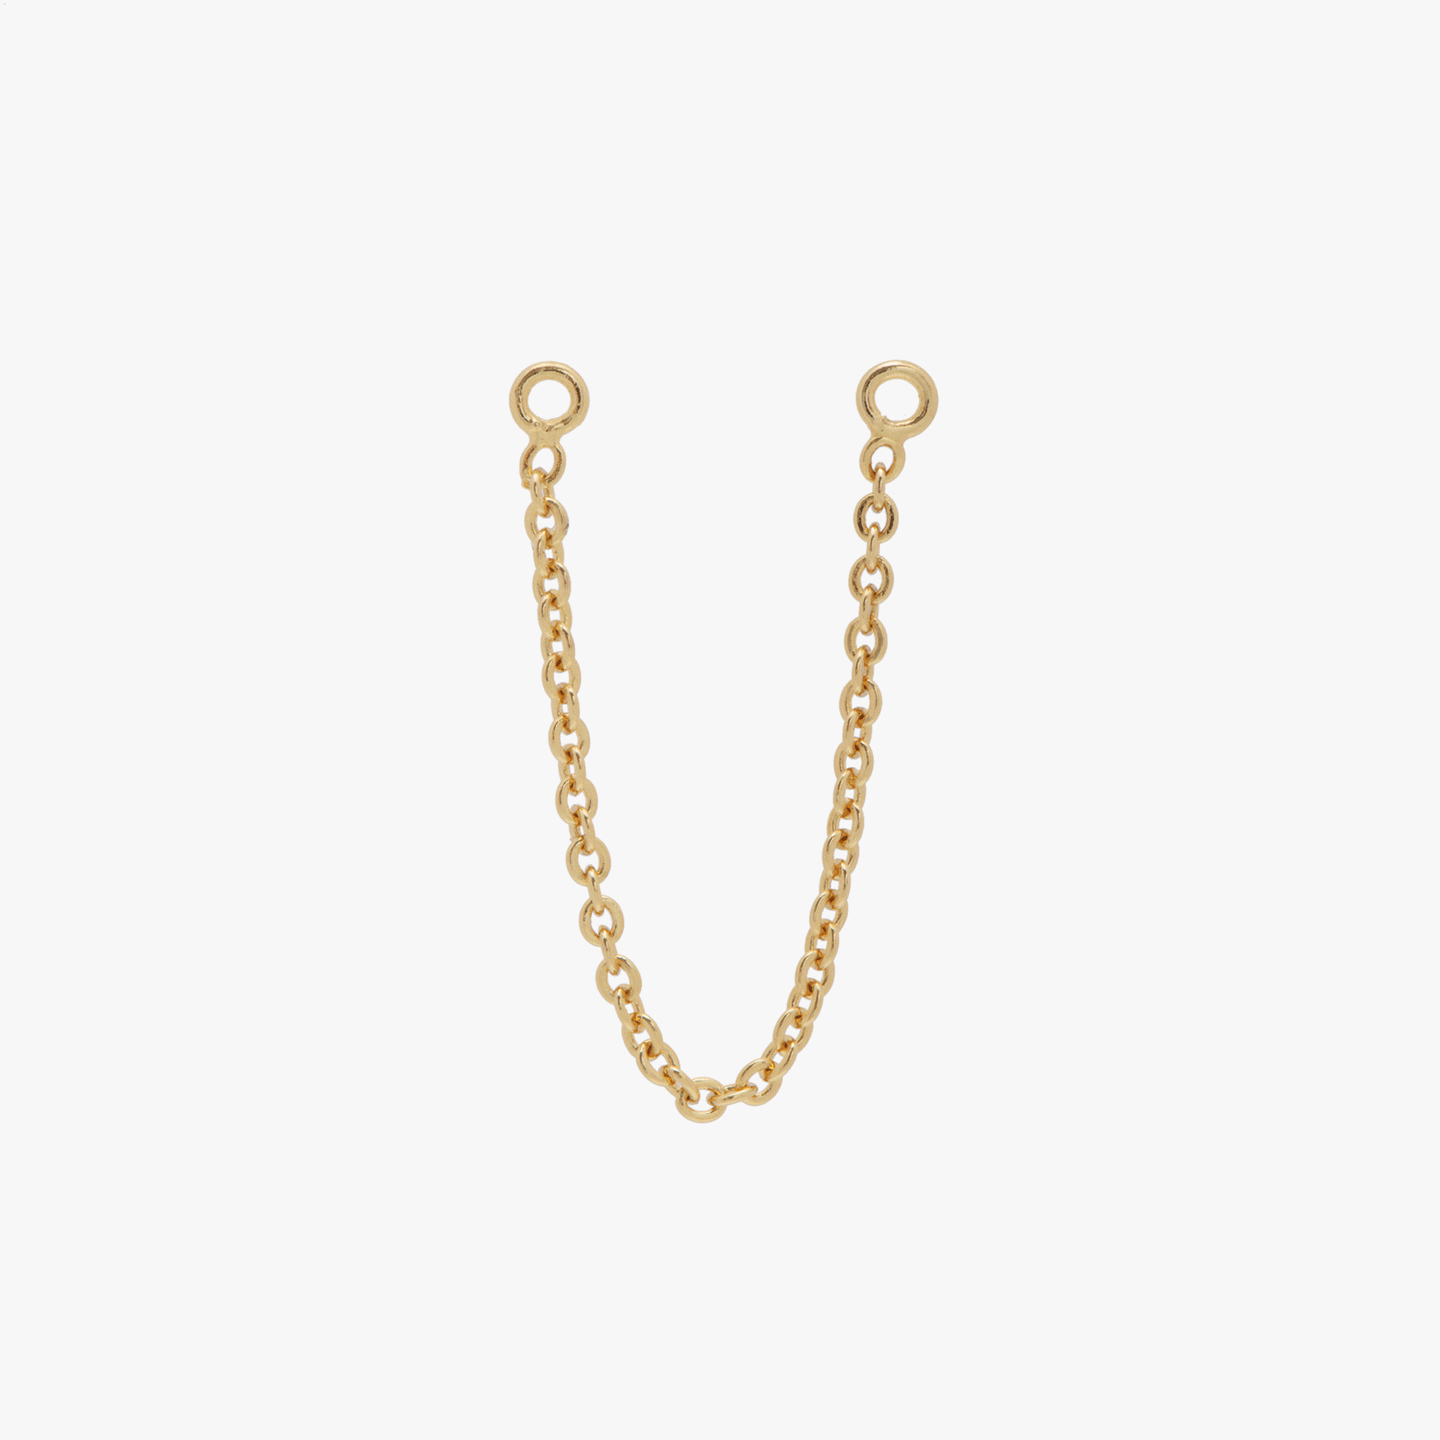 A gold connector chain available in 15mm, 30mm, or 45mm color:null|45mm|30mm|15mm|60mm|15mm / gold|30mm / gold|45mm / gold|60mm / gold